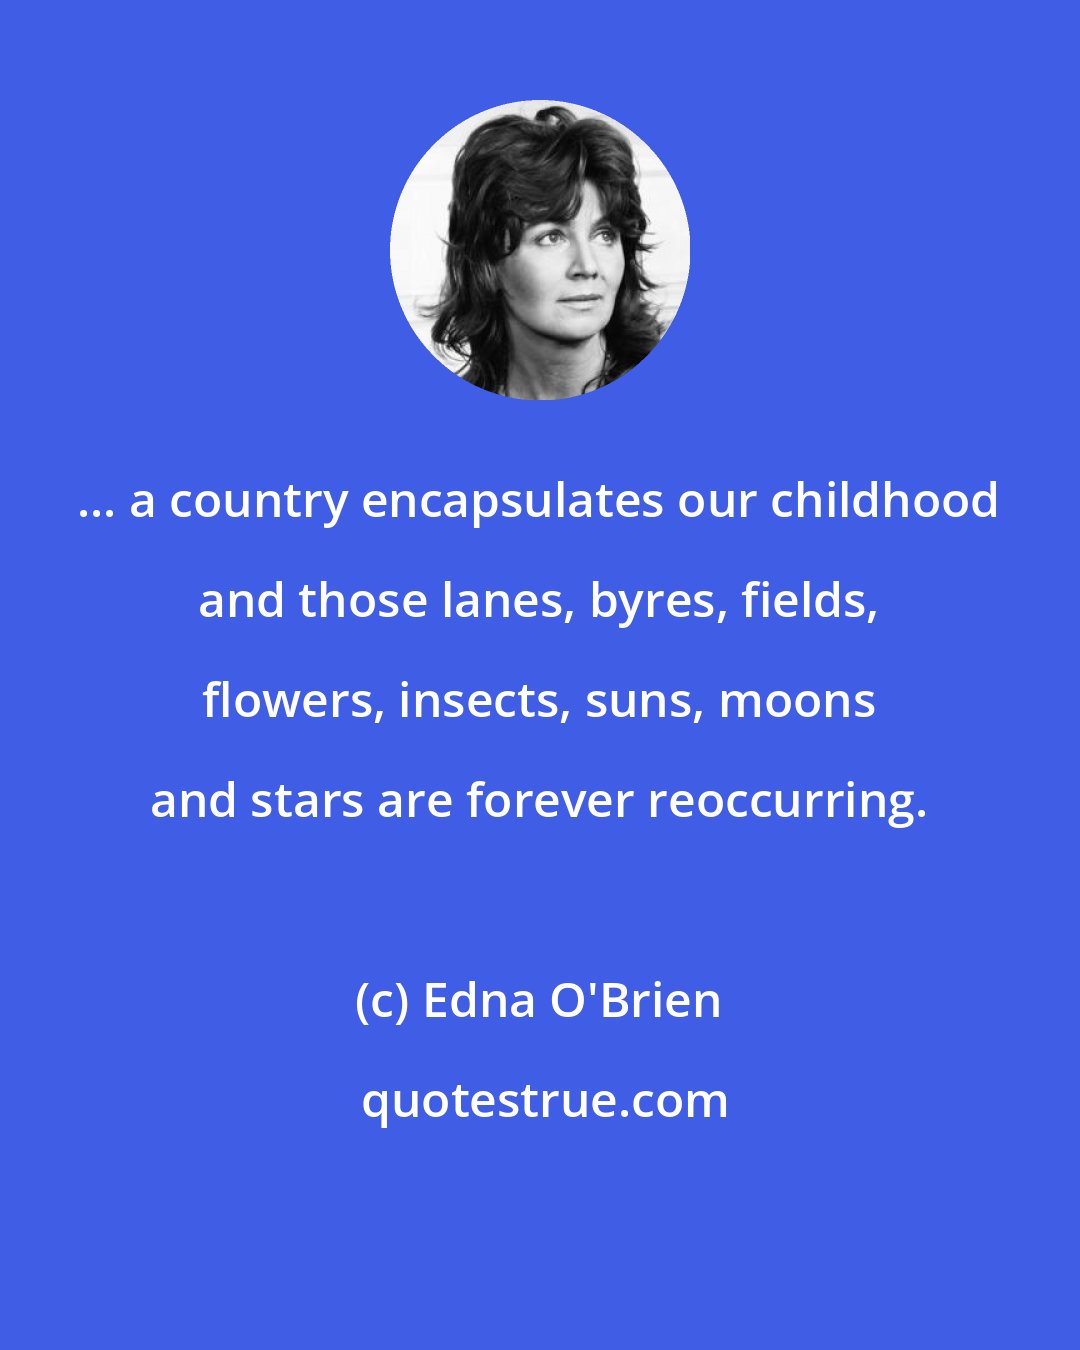 Edna O'Brien: ... a country encapsulates our childhood and those lanes, byres, fields, flowers, insects, suns, moons and stars are forever reoccurring.